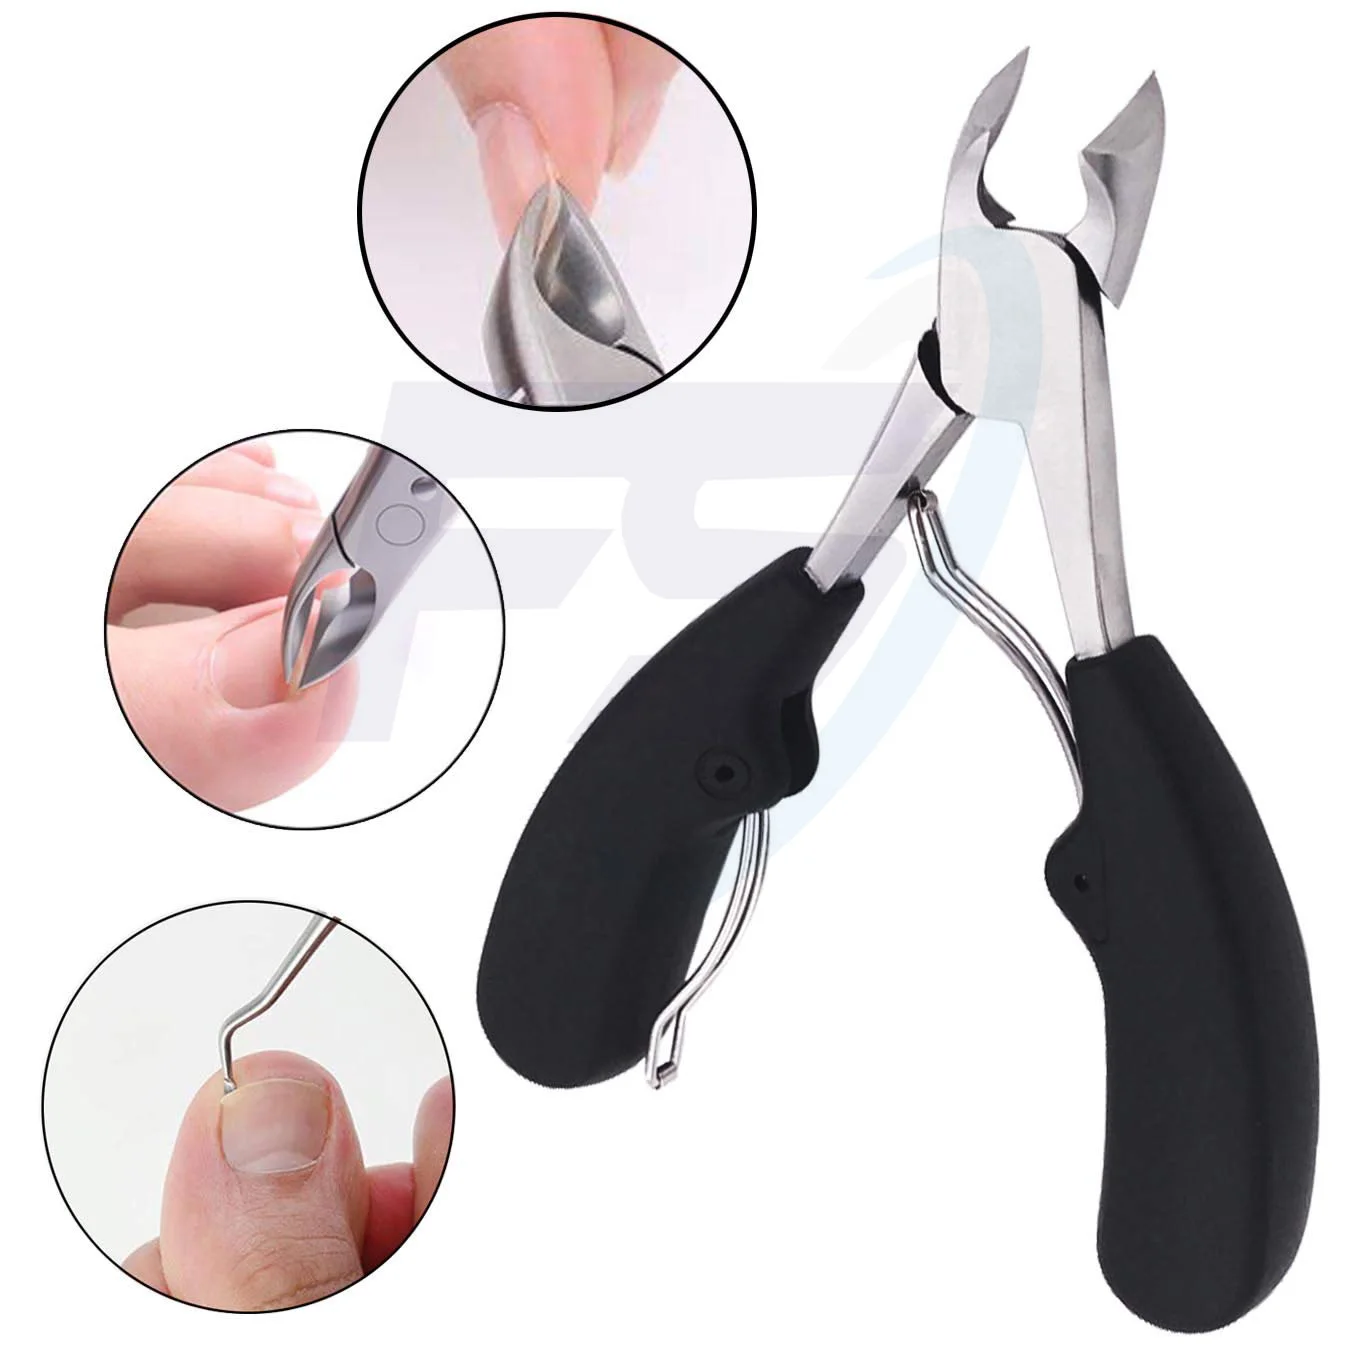 Toenail Clippers For Thick Or Ingrown Toenails Stainless Steel Nail Cutters  Set For Seniors Nail Clipper Trimmer - Buy Nail Nipper,Manicure  Pedicure  Implements,Nail Tools Product on Alibaba.com